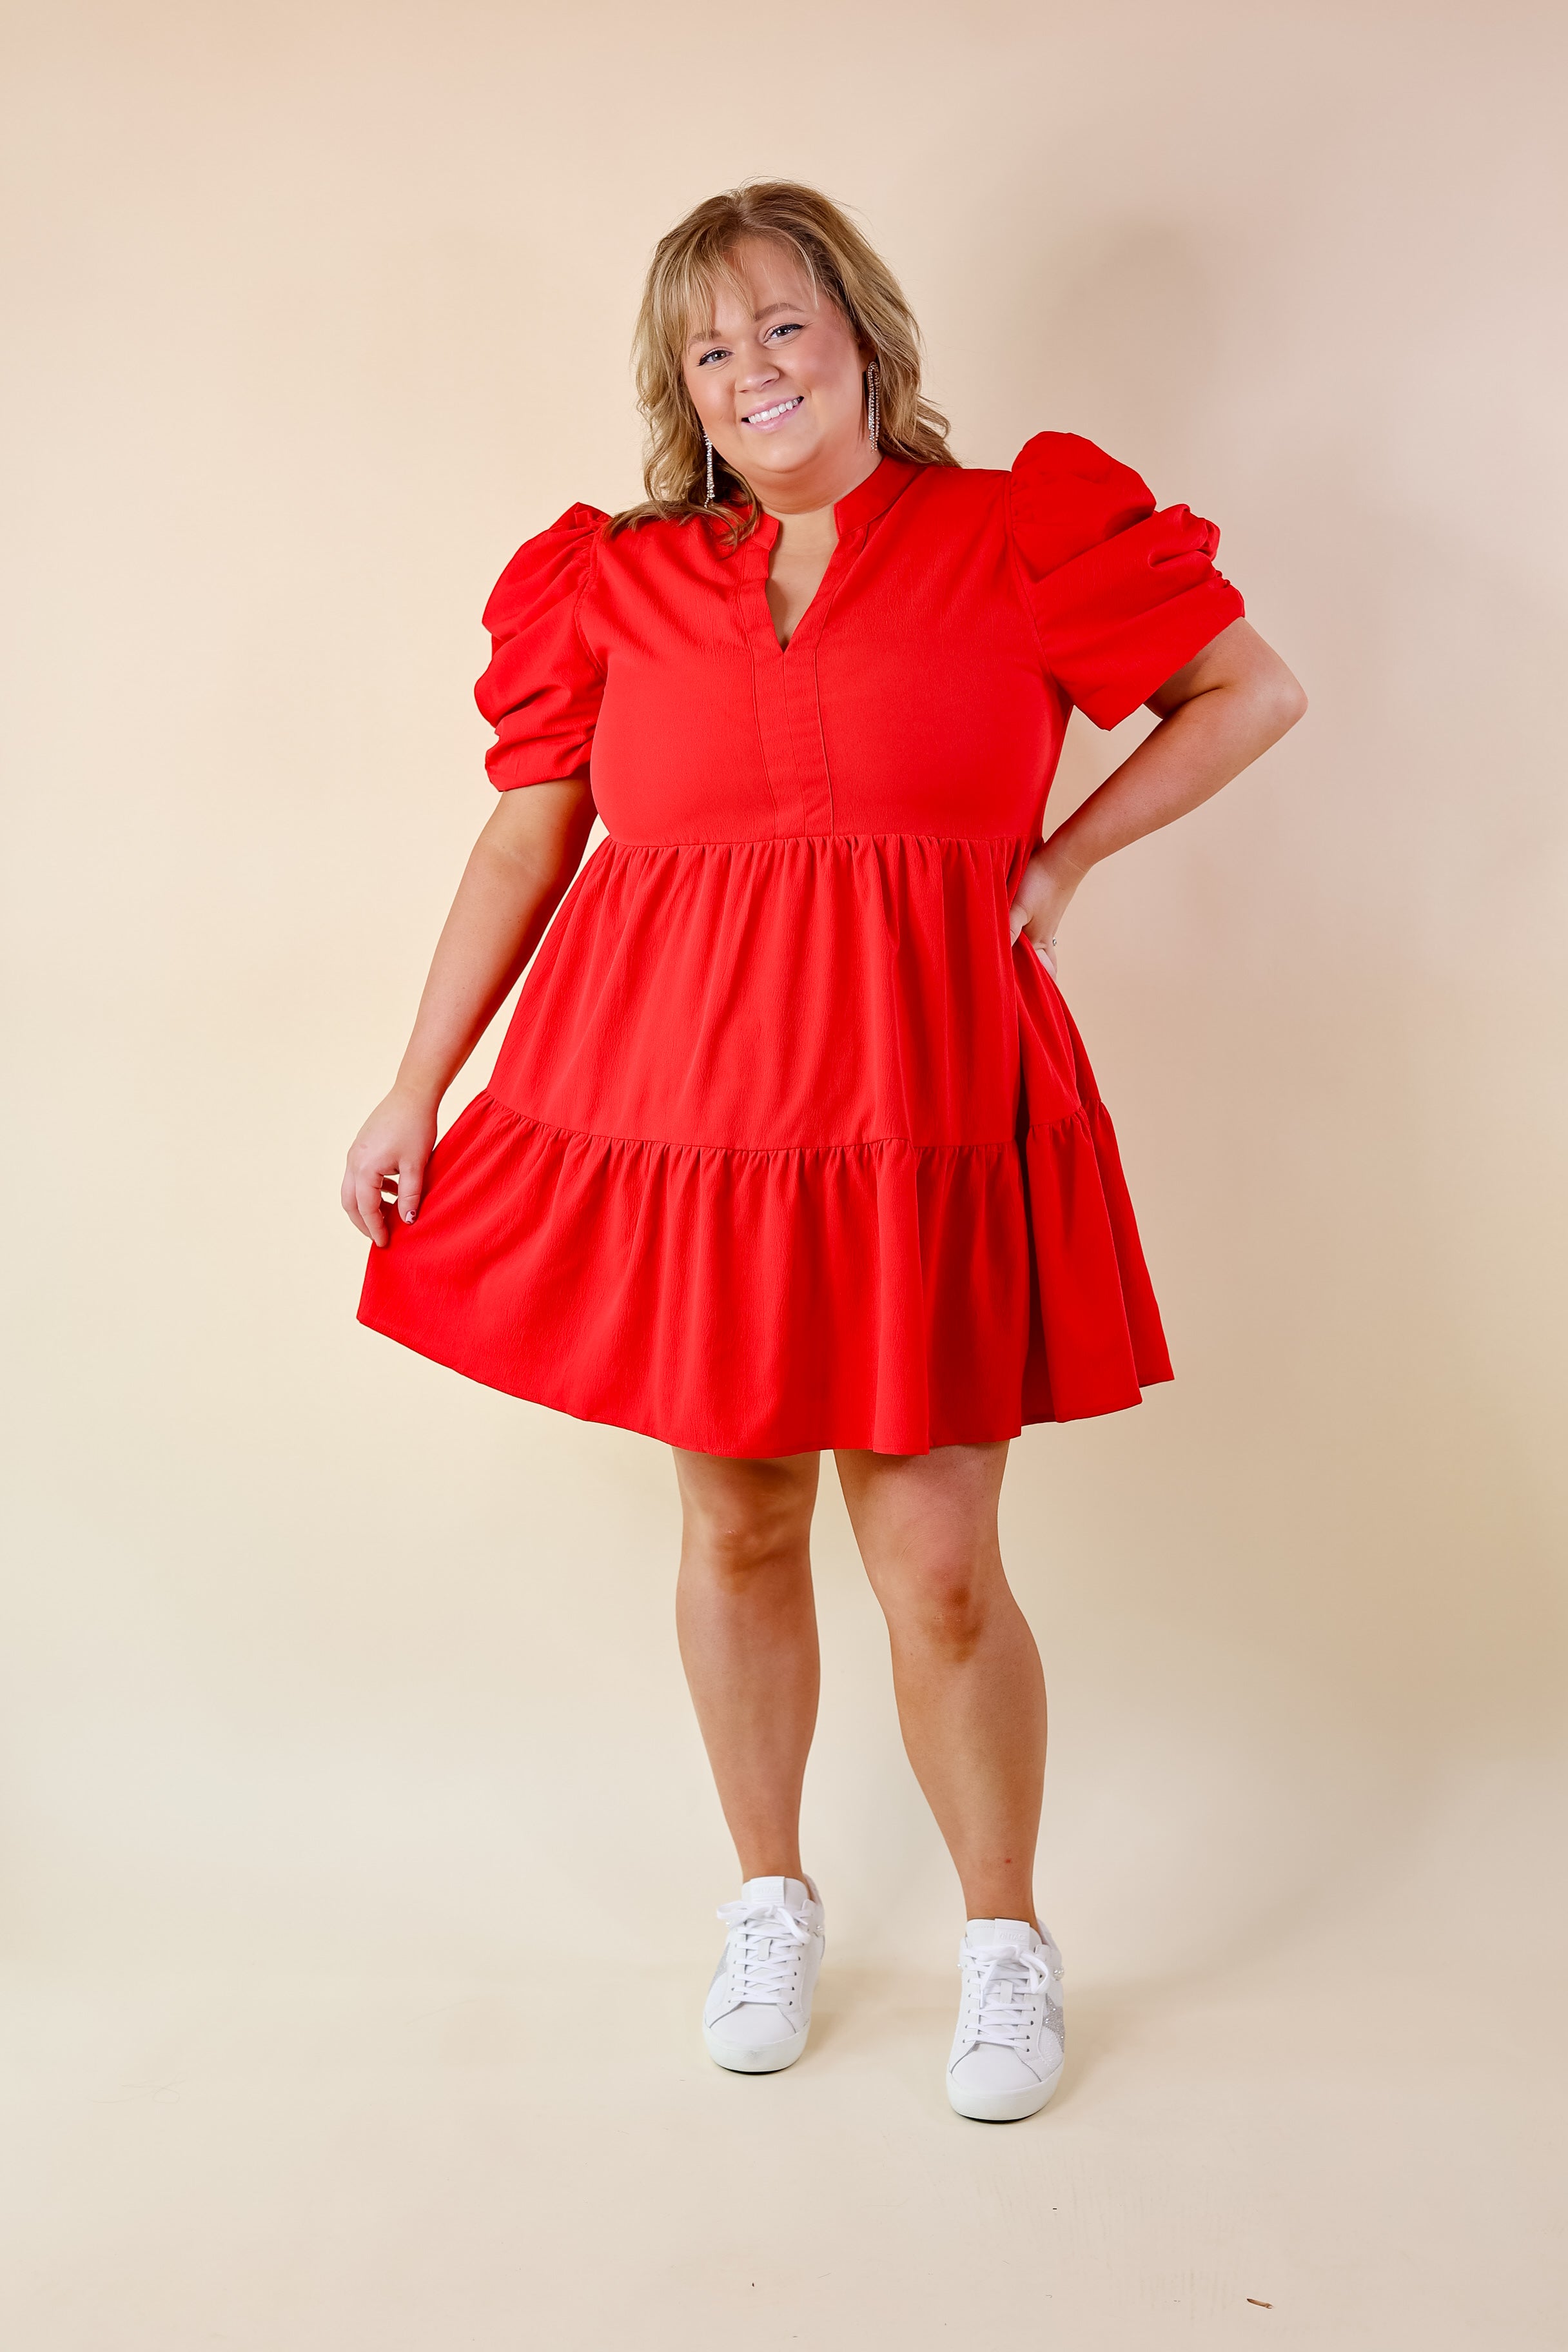 Call Me Chic Balloon Sleeve Short Dress in Red - Giddy Up Glamour Boutique